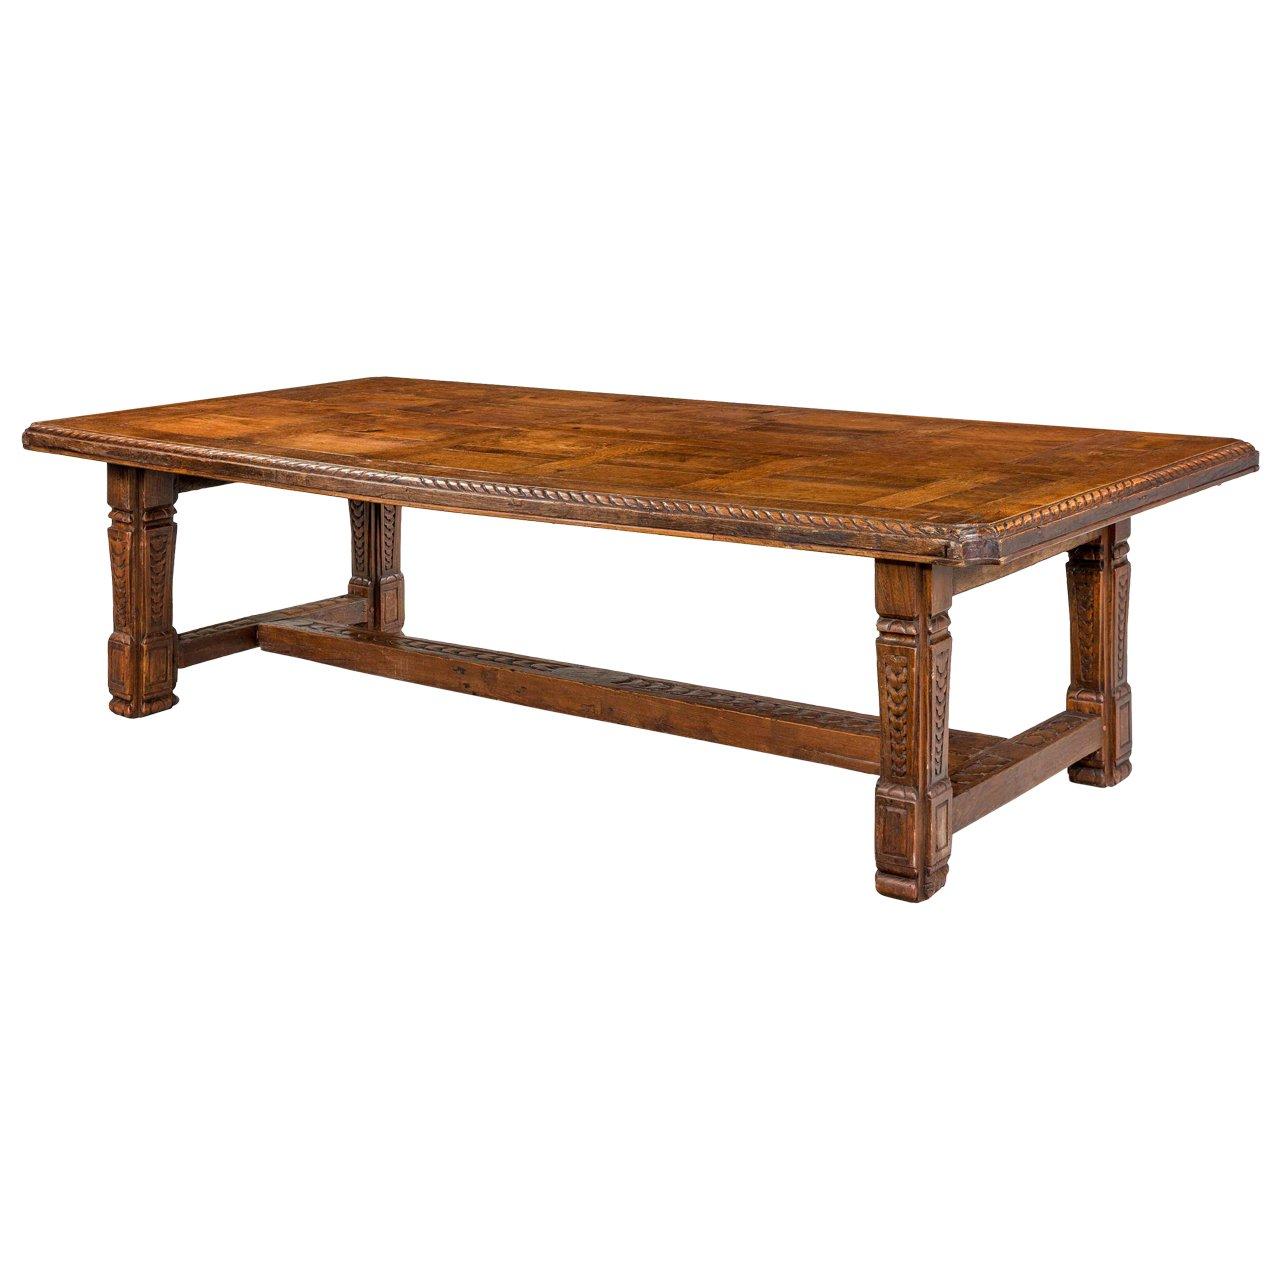 Late 19th Century Oak Refectory Table